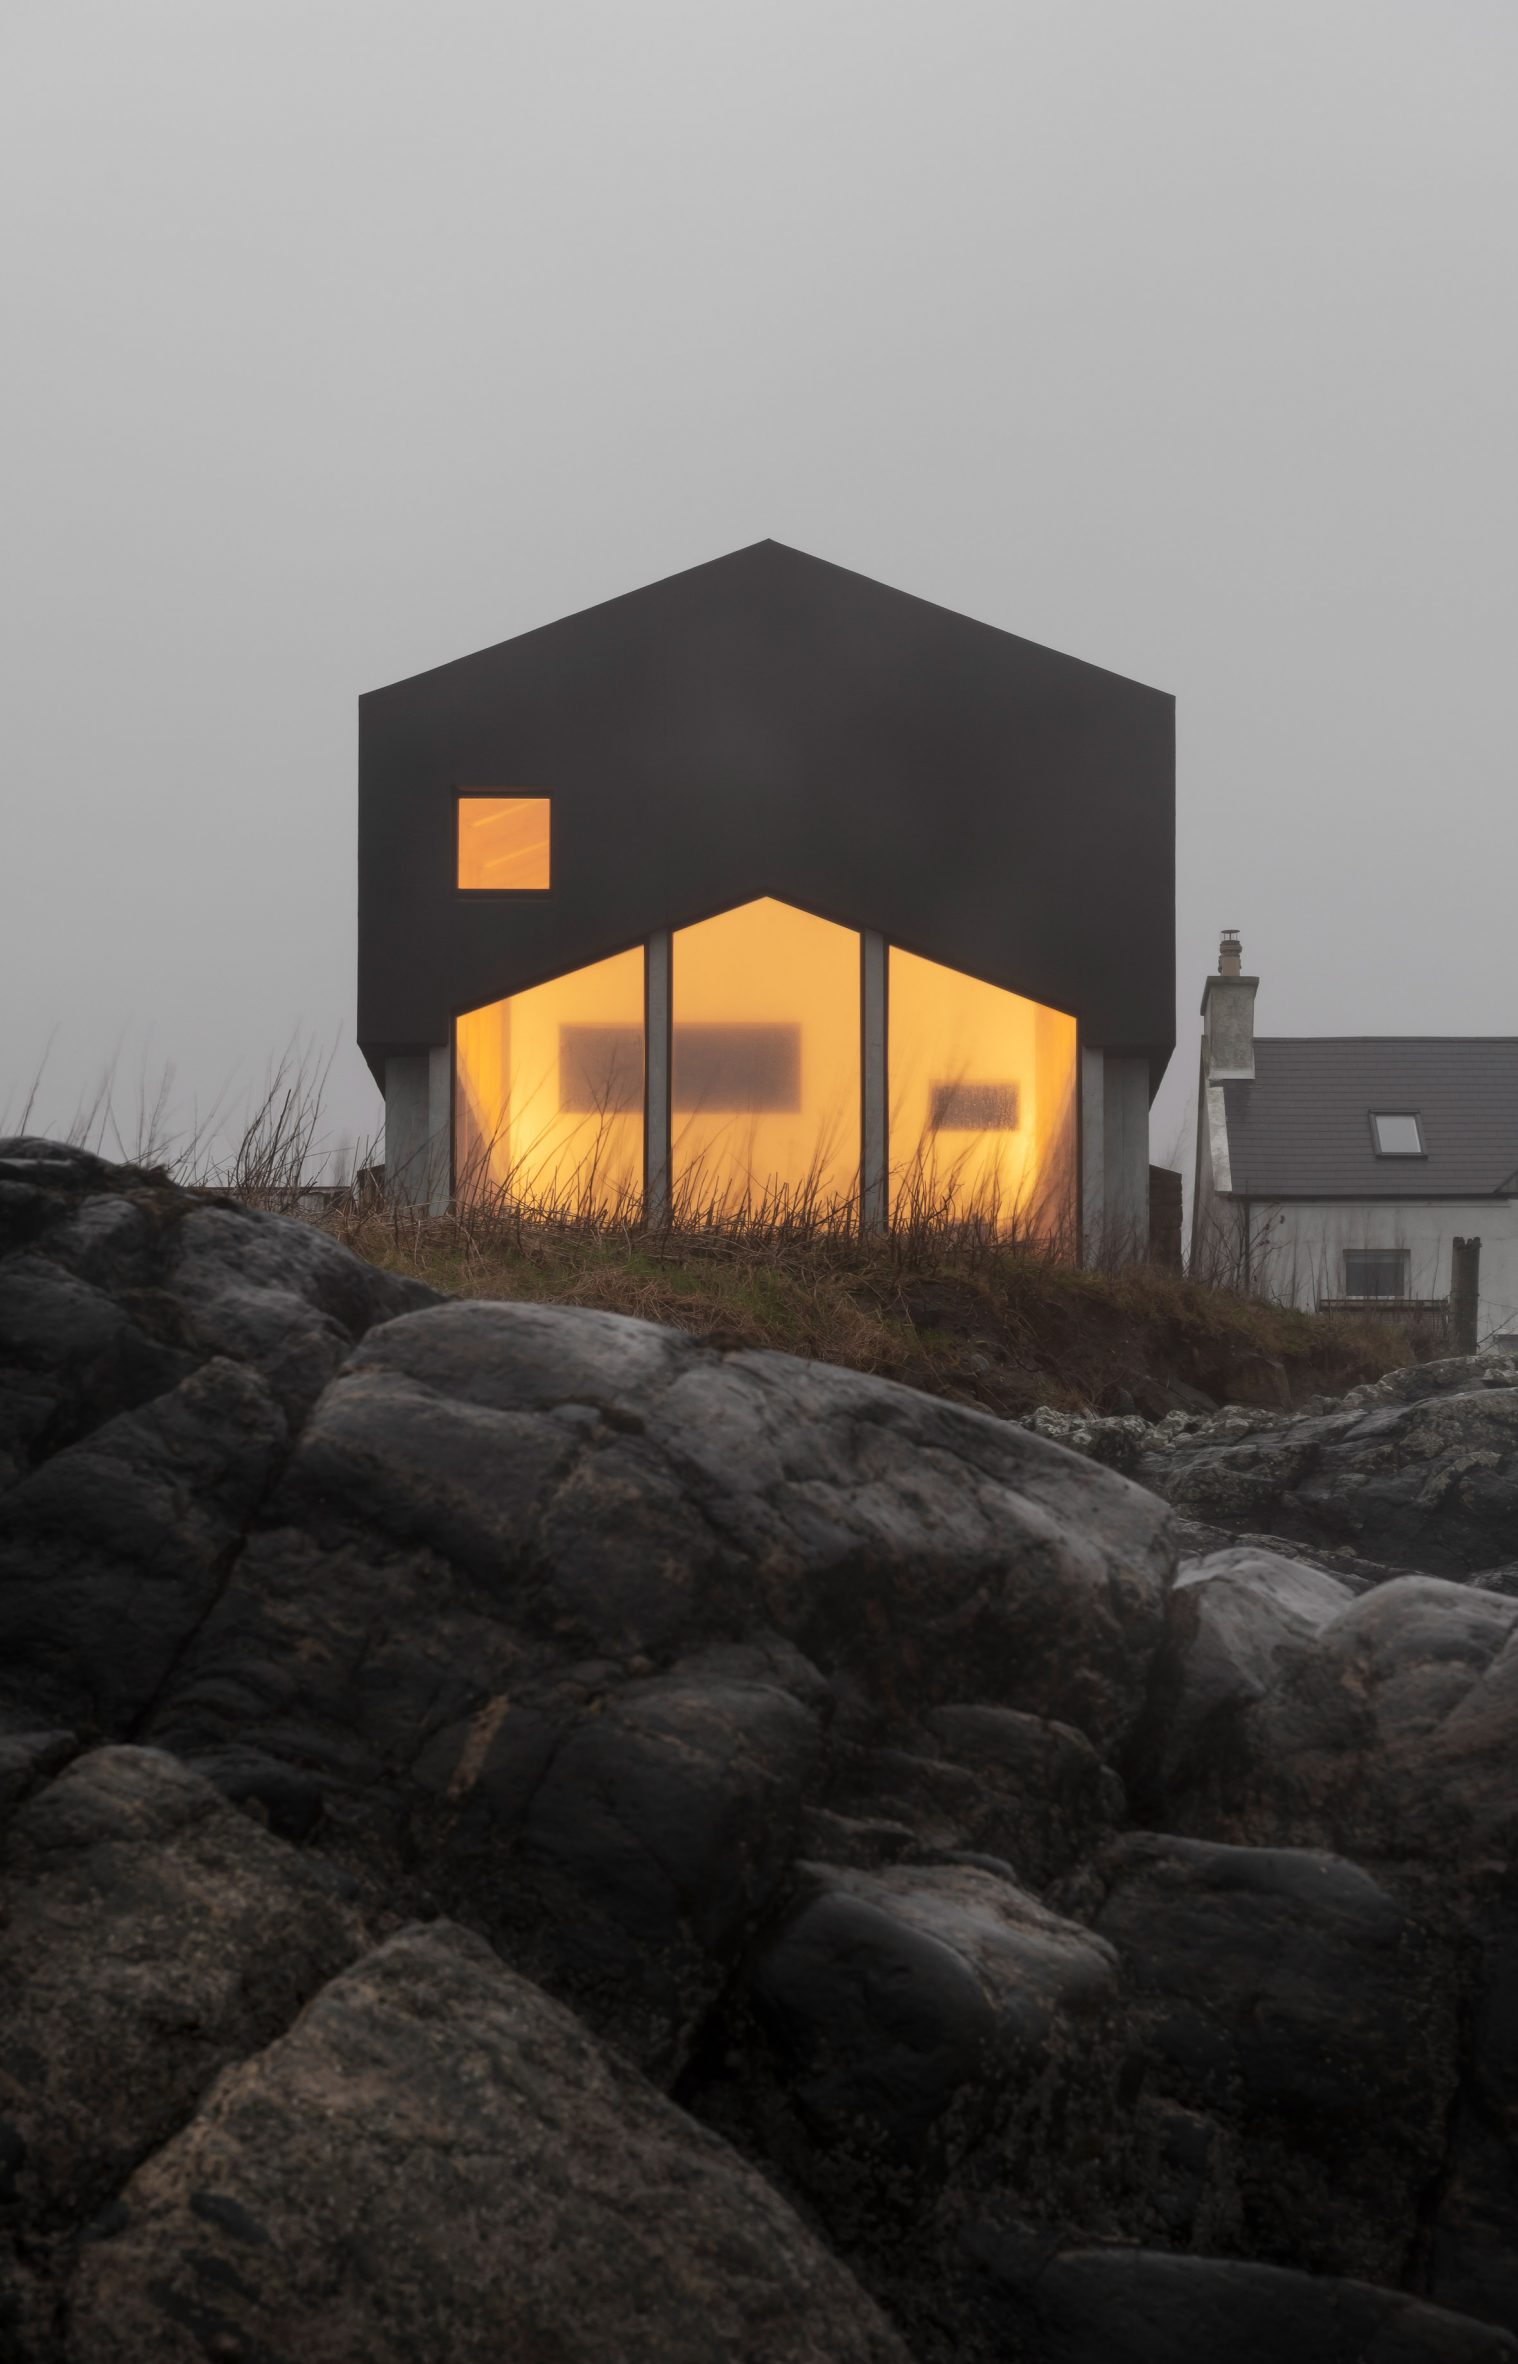 Mannal House has a gable end and is pictured lit at dusk